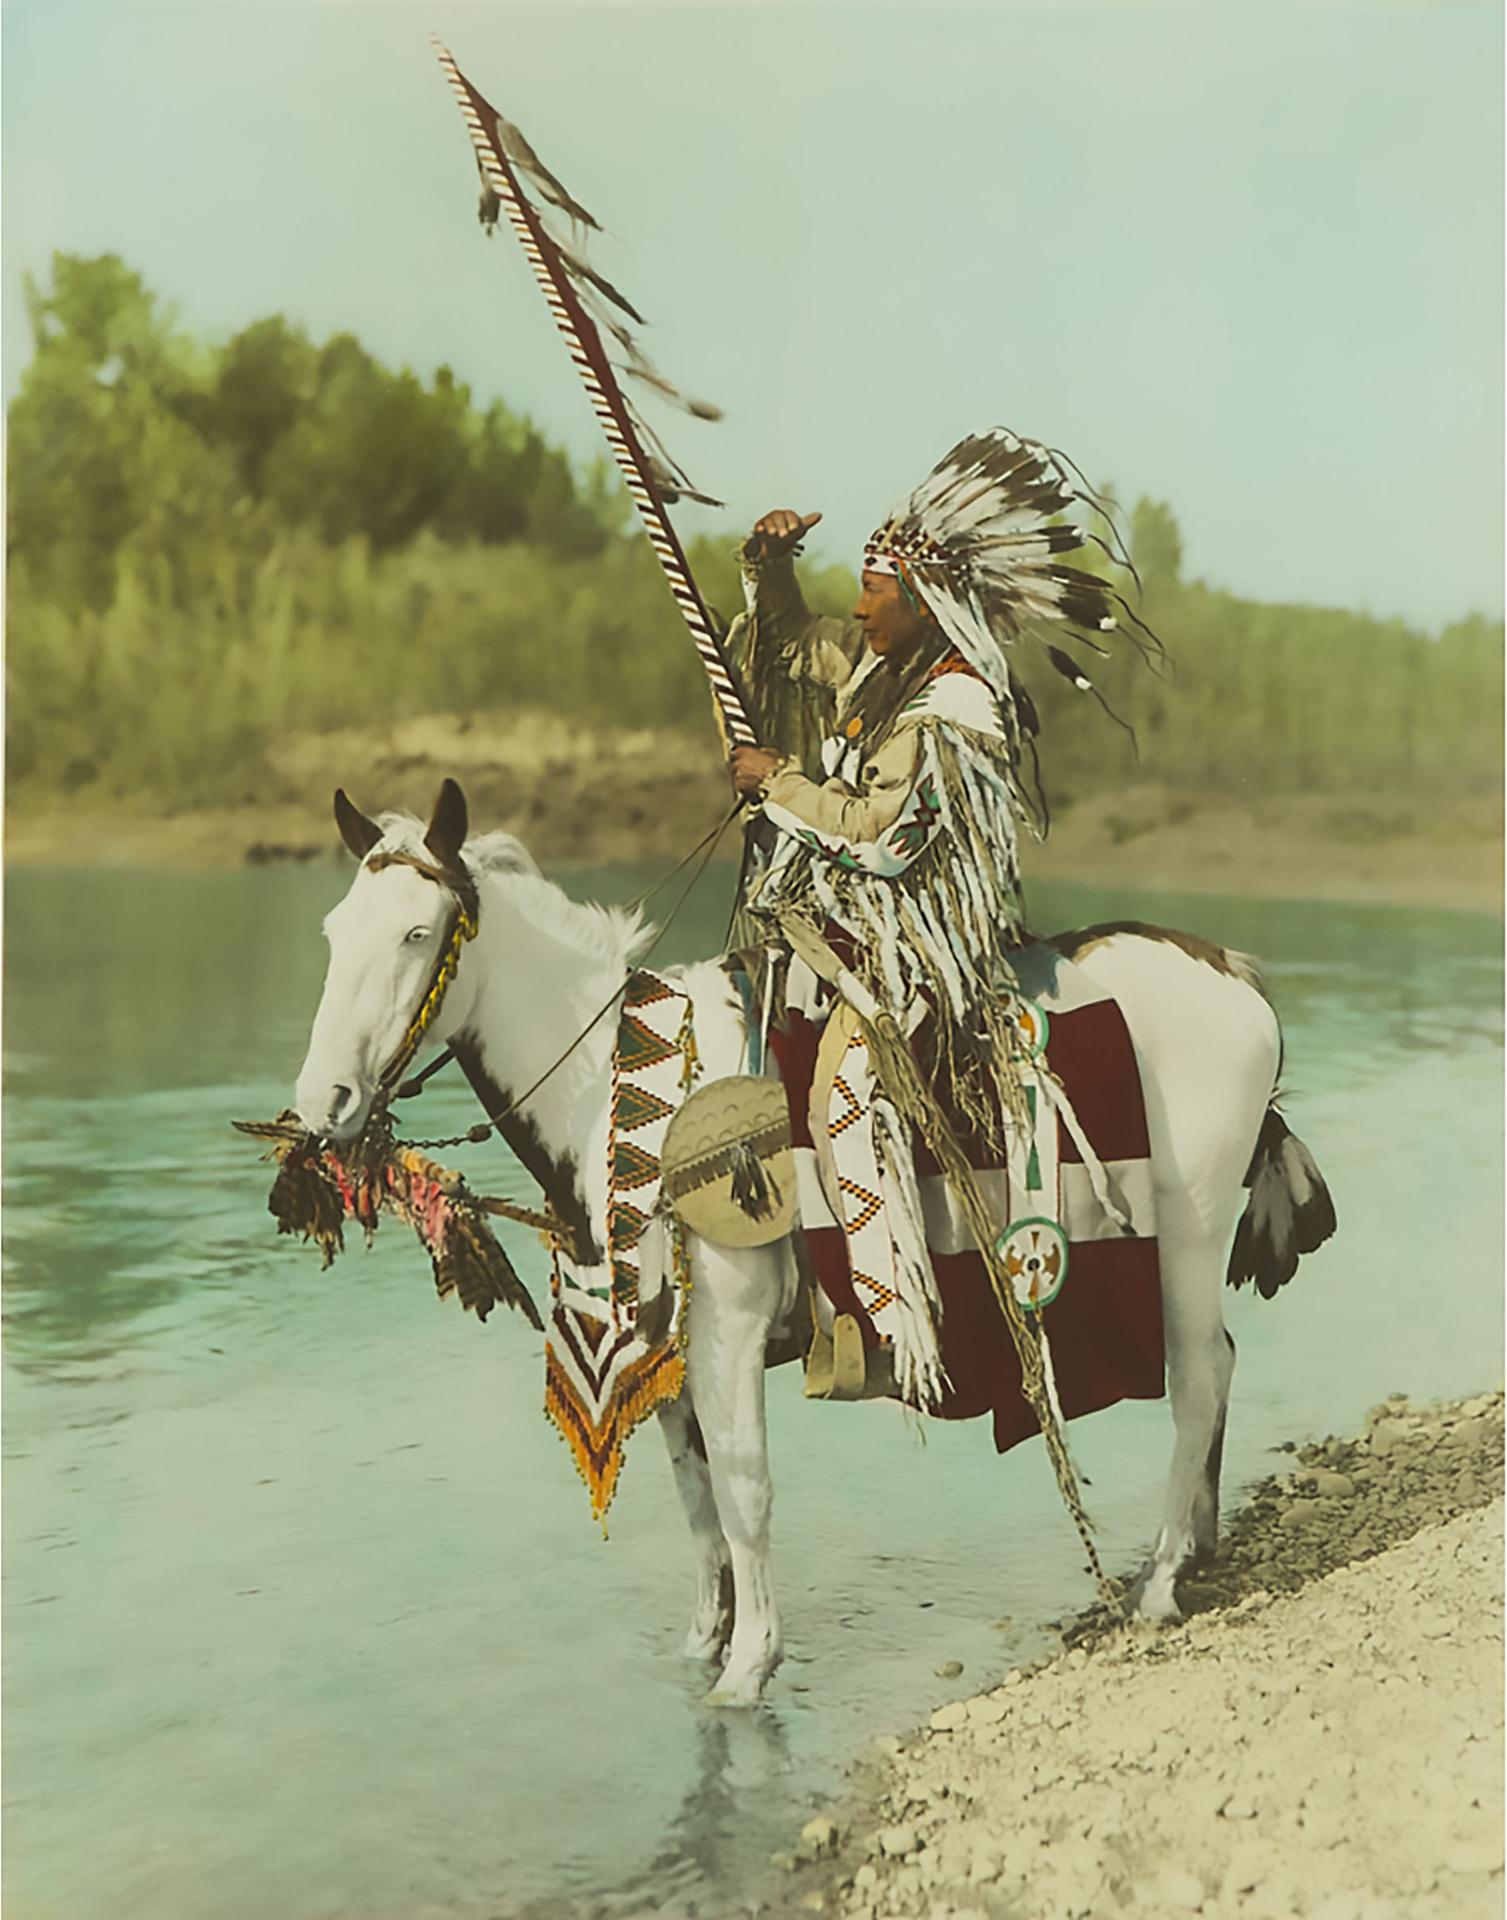 Harry Pollard (1880-1968) - Chief Duck (On Horseback With Coup Stick, Siksika [blackfoot]), Ca. 1925